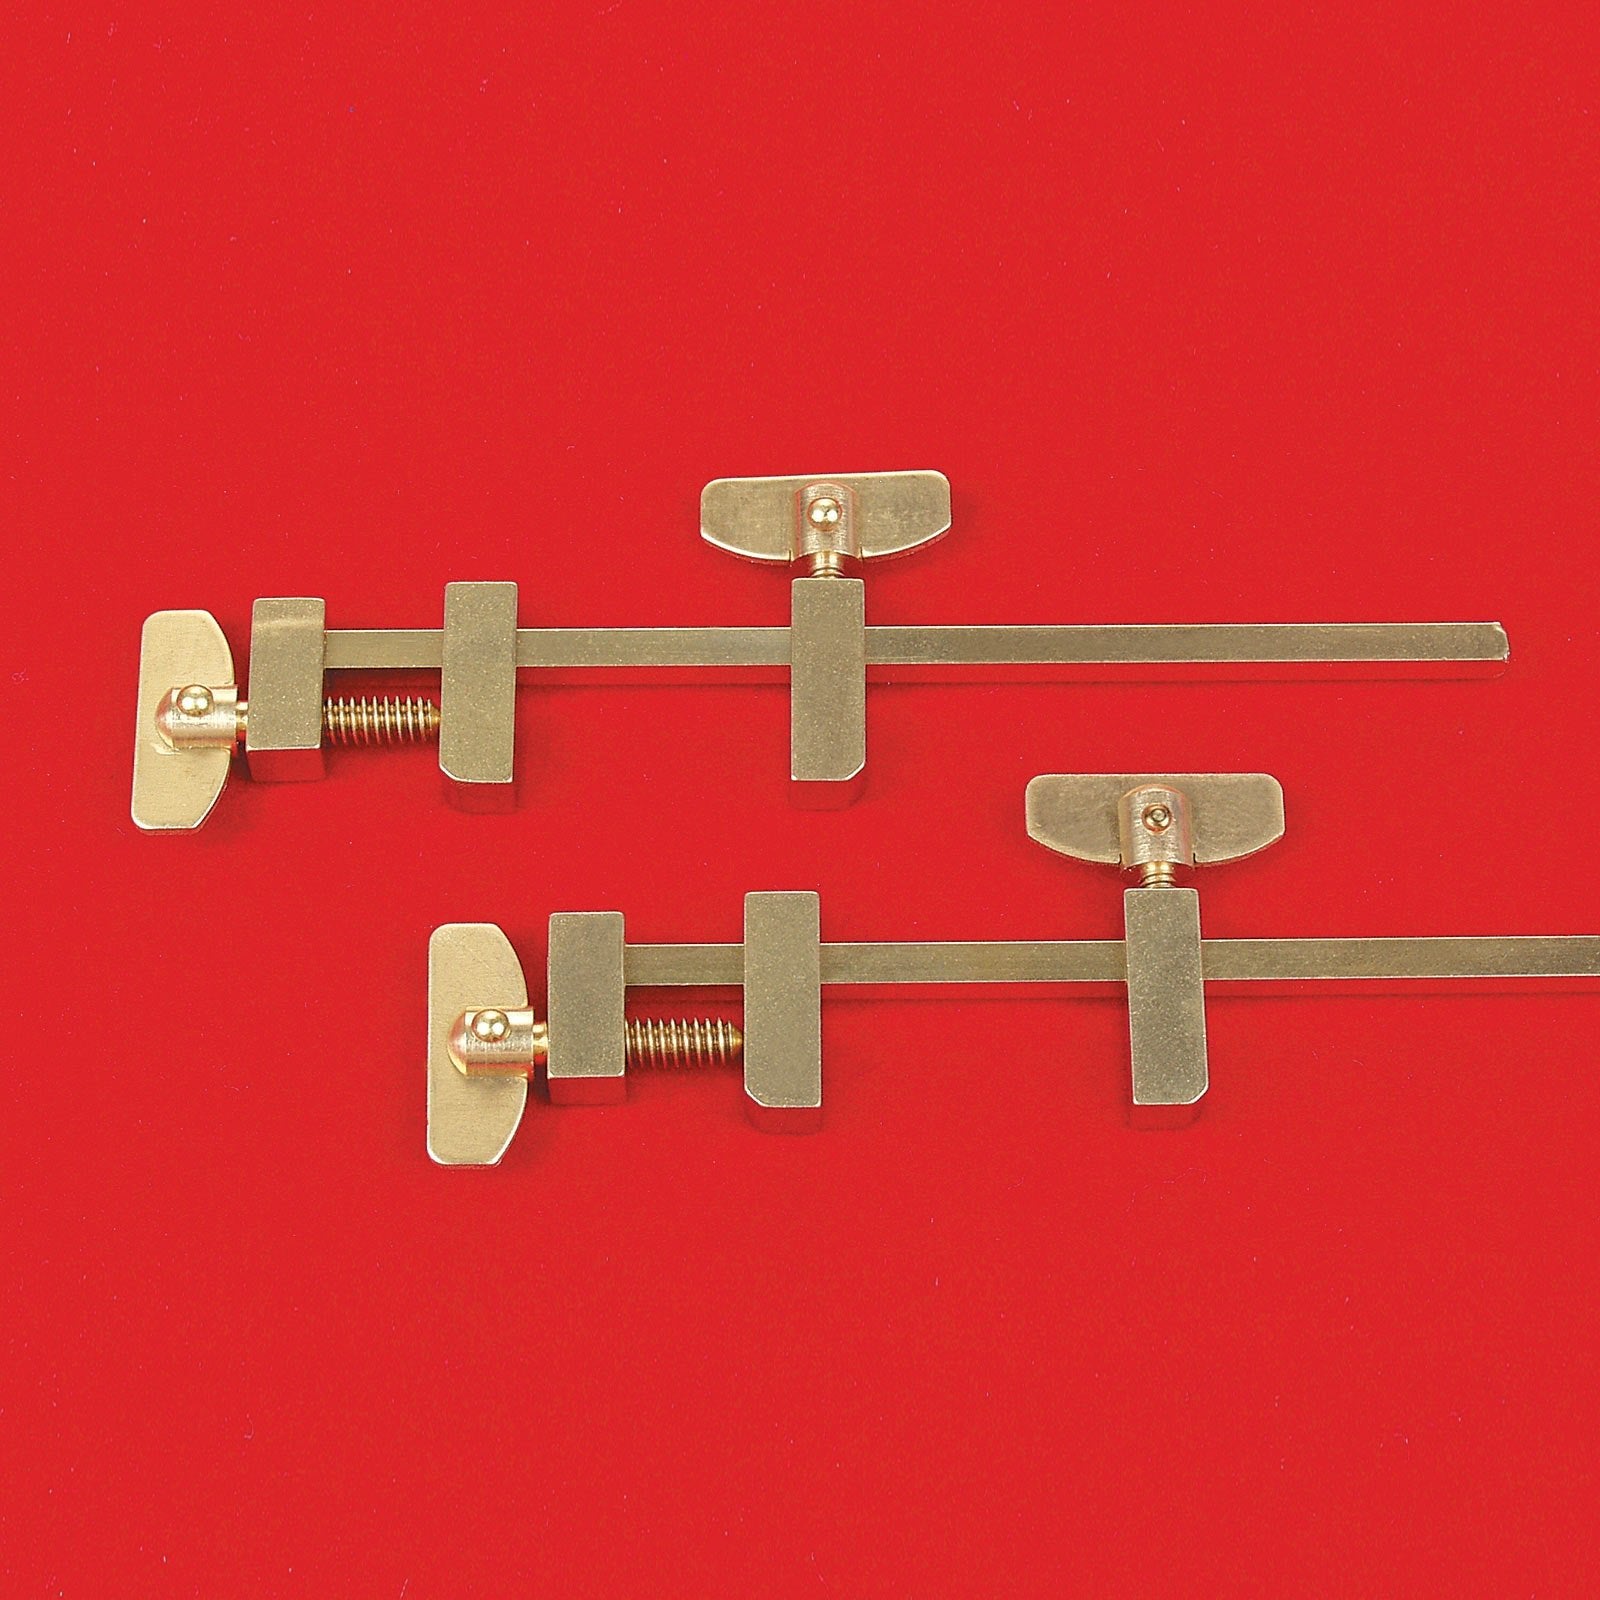 Solid Brass Miniature Bar Clamps, 4 - 3/4 Inches Long (Set of 2) - Micro - Mark Tool Clamps & Vises